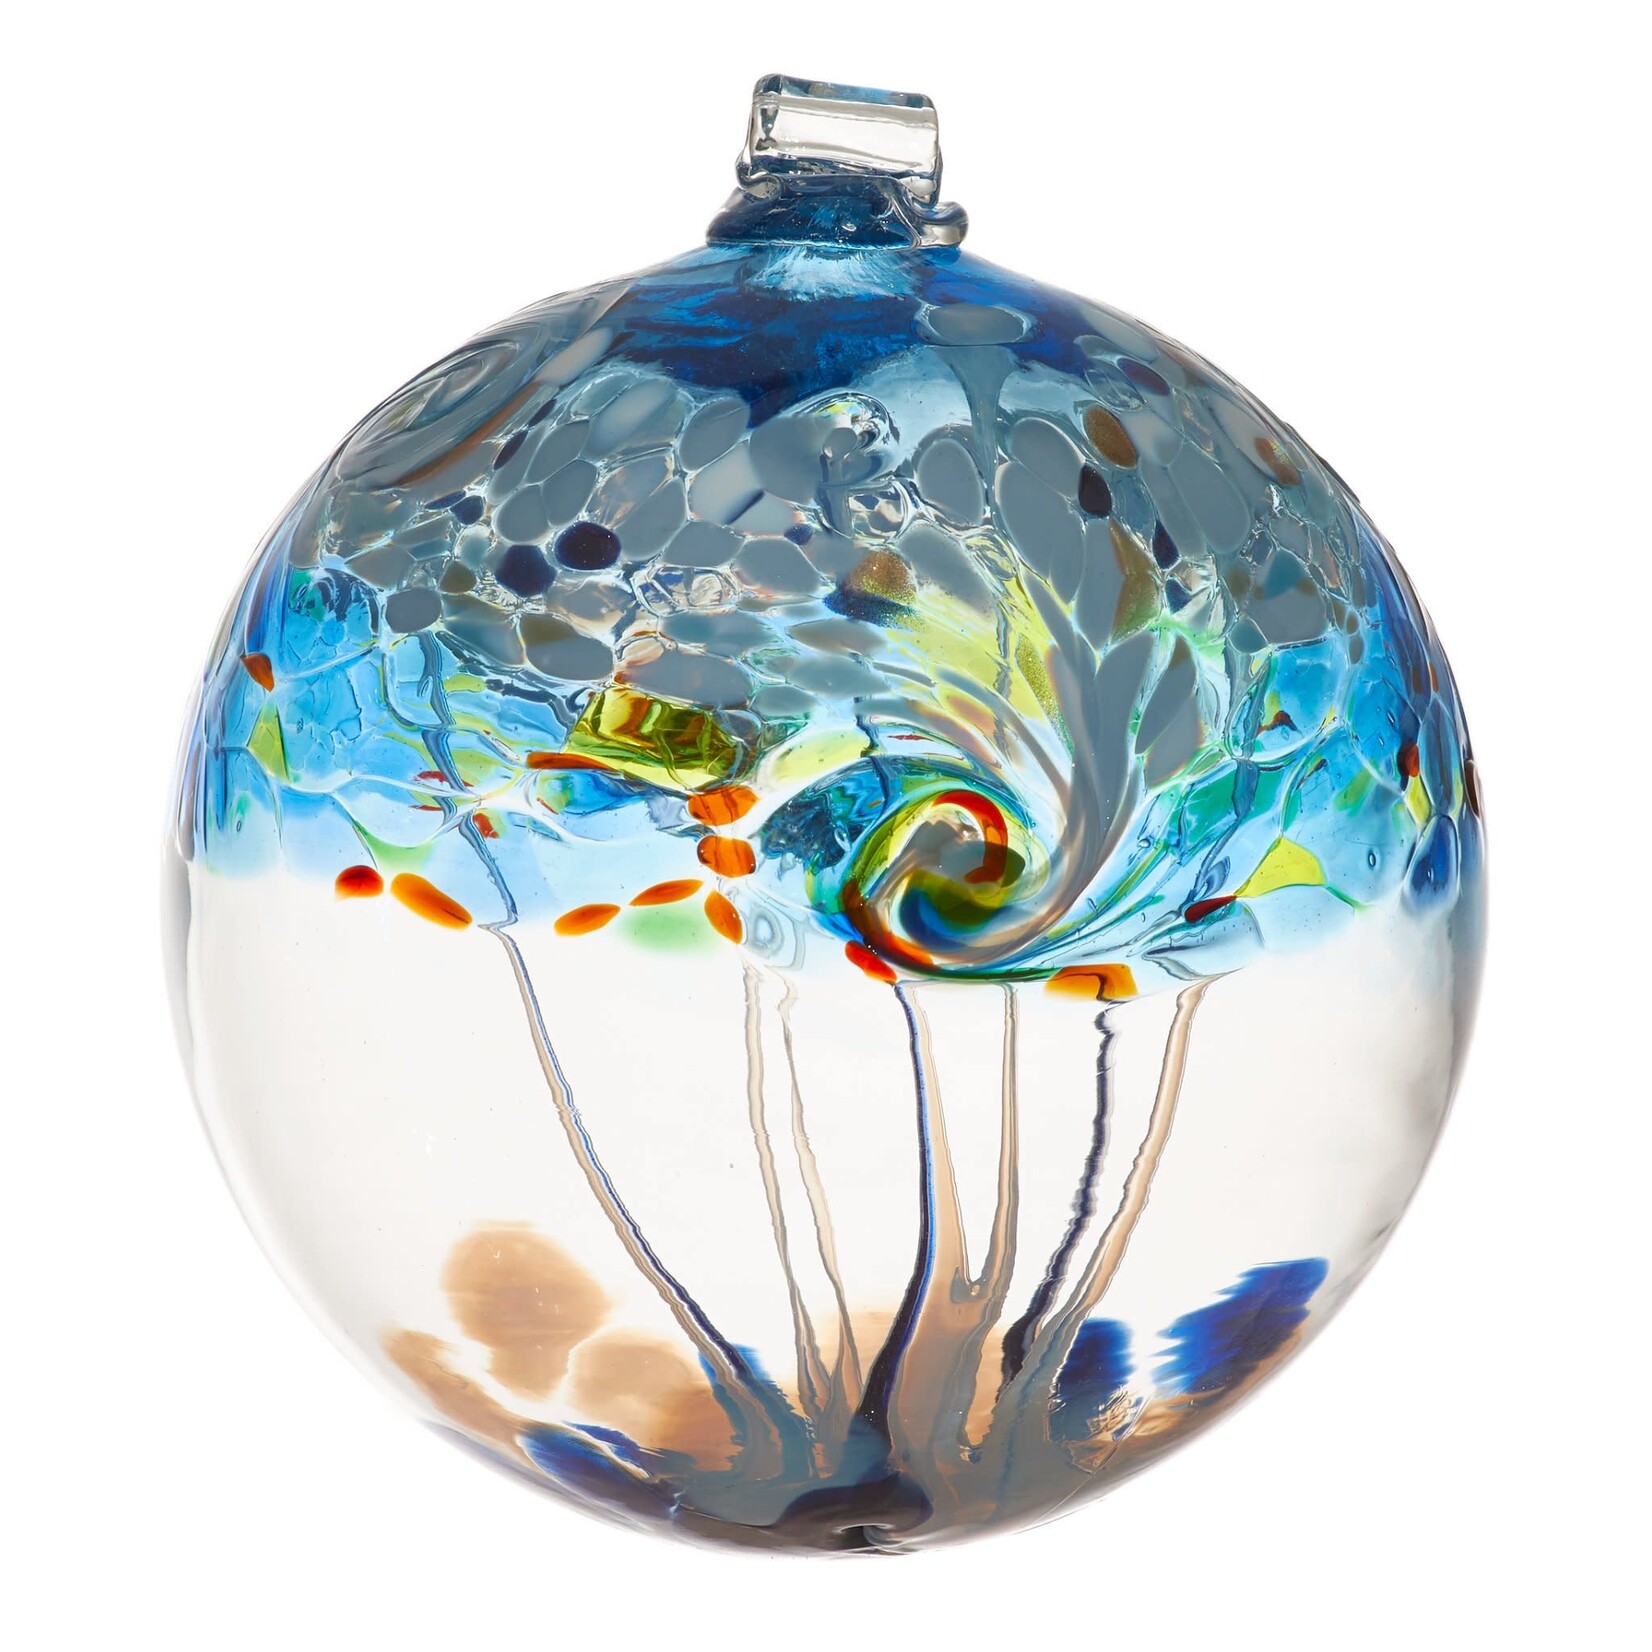 Kitras Art Glass AIR (Elements Collection, 6" D., KITRAS)